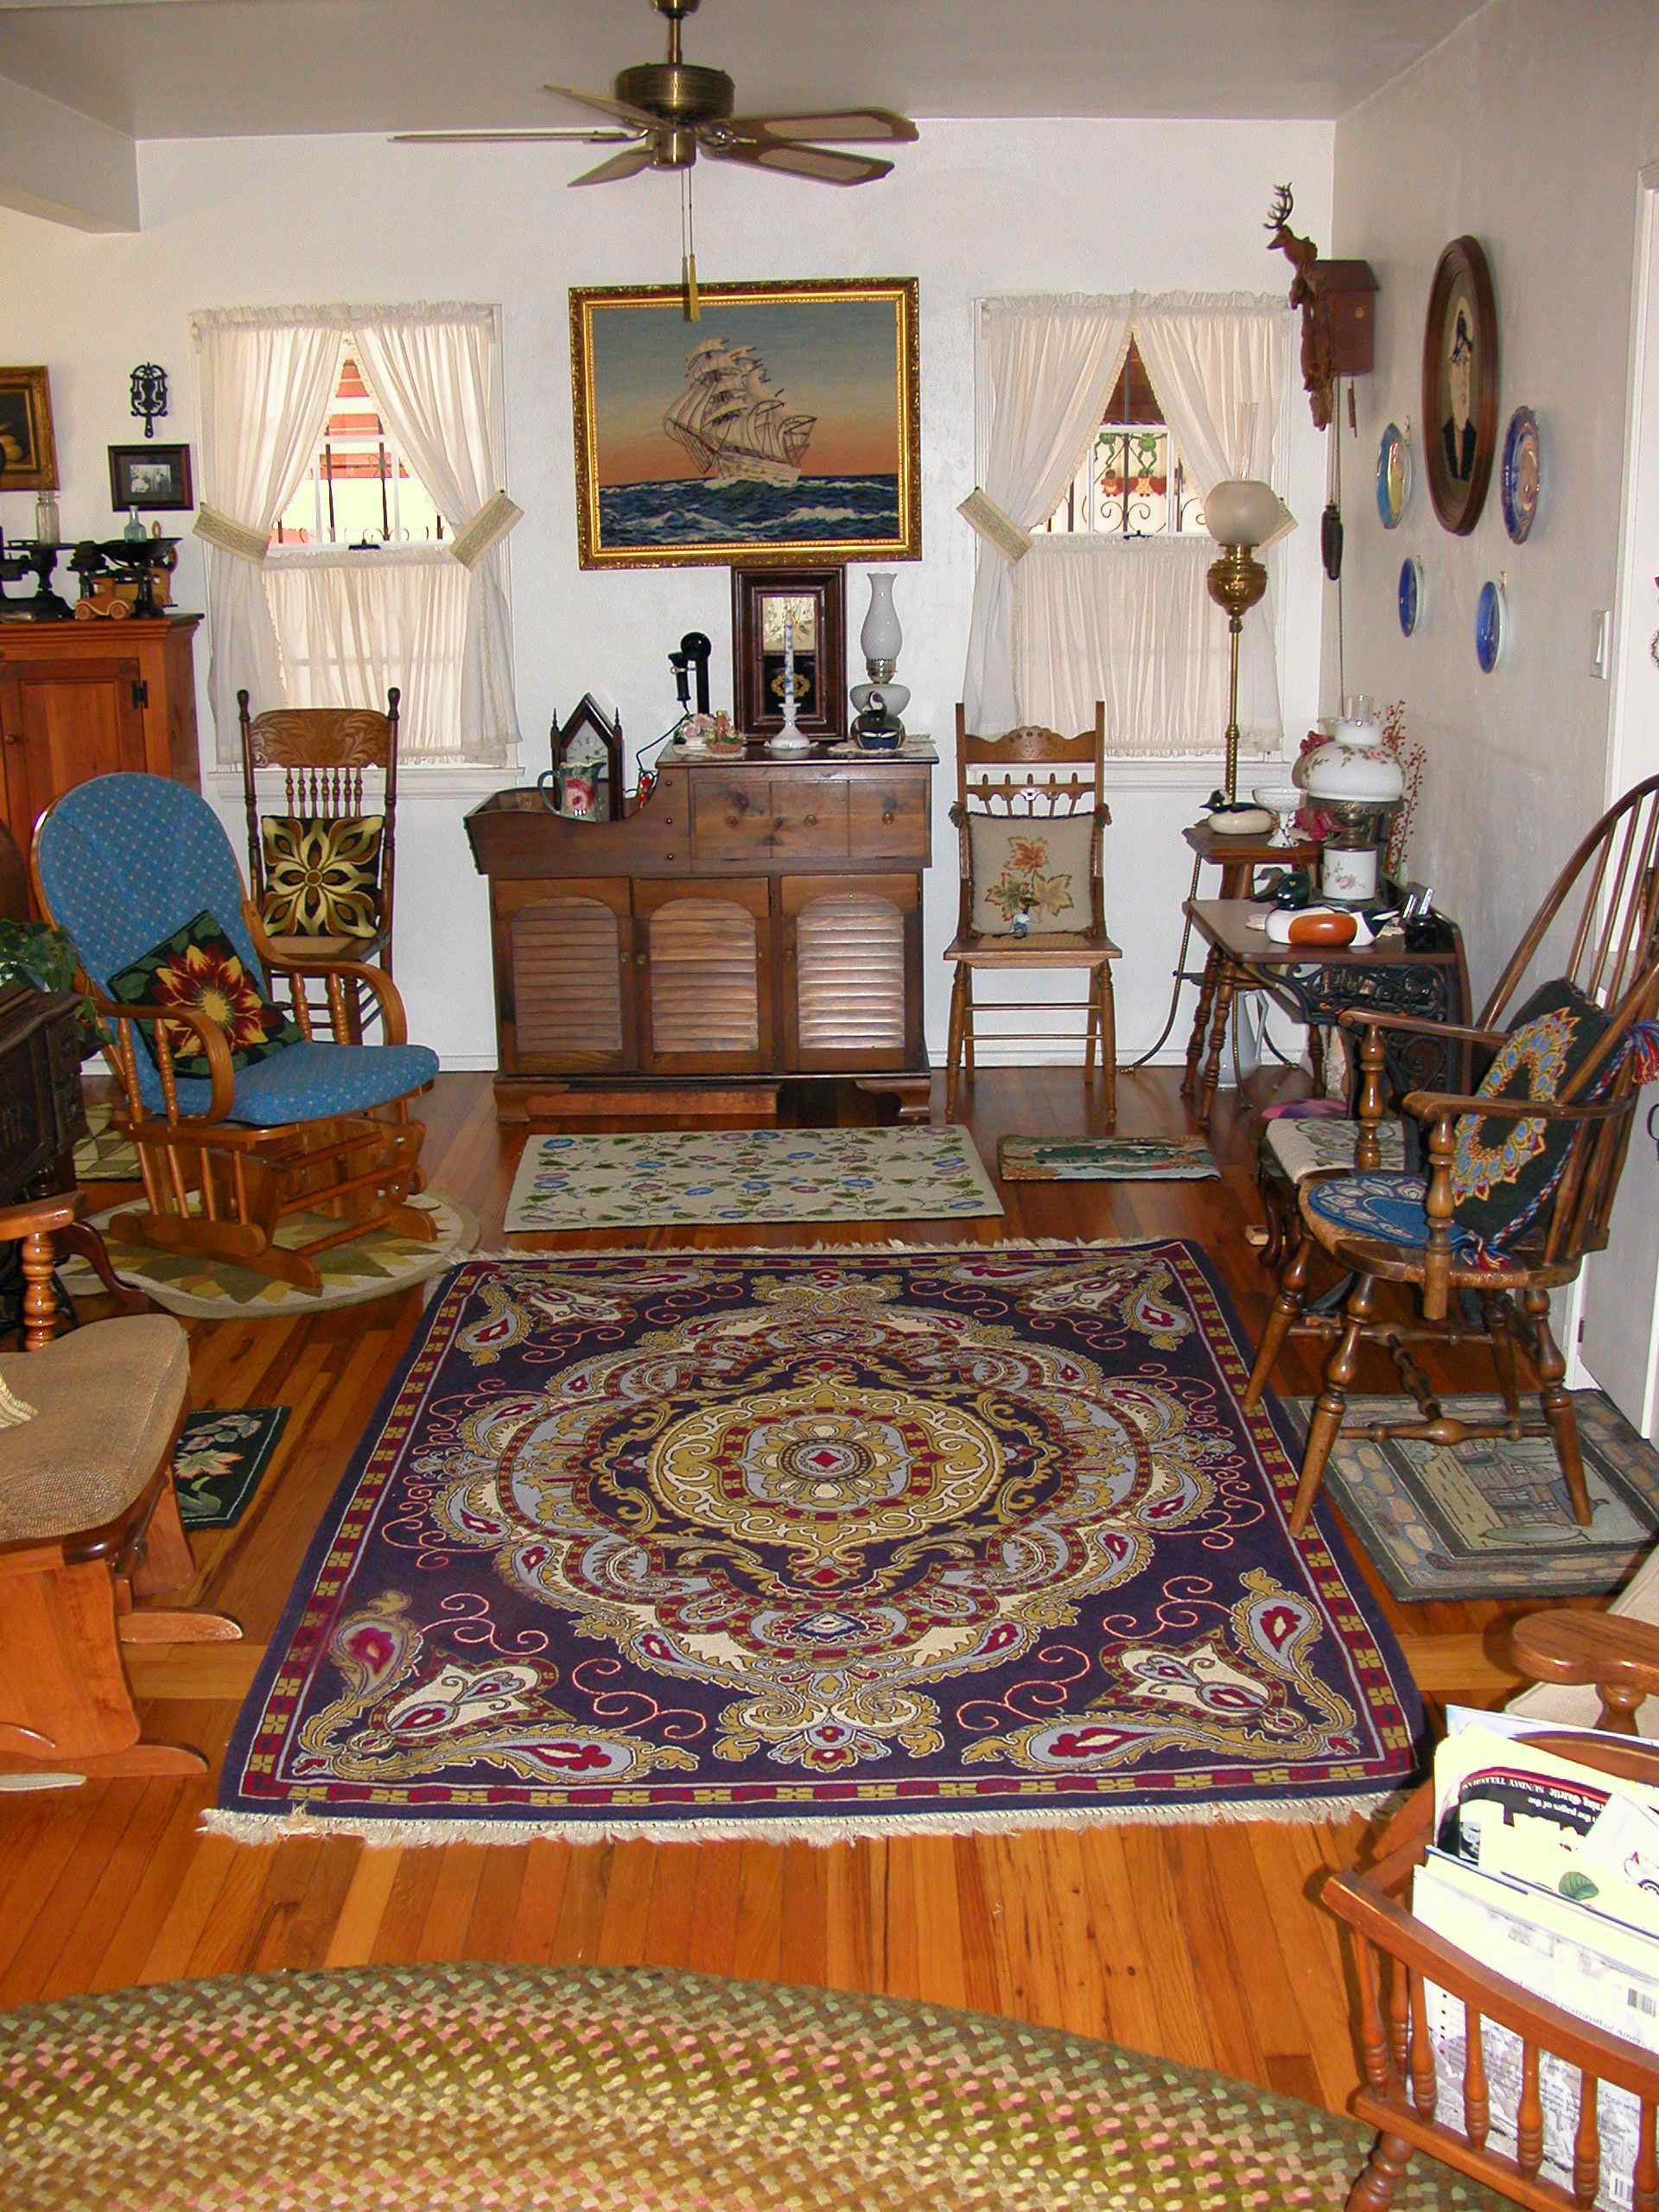 Persian Rug Living Room
 Deluxe Persian Living Room Designs with Artistic Rug